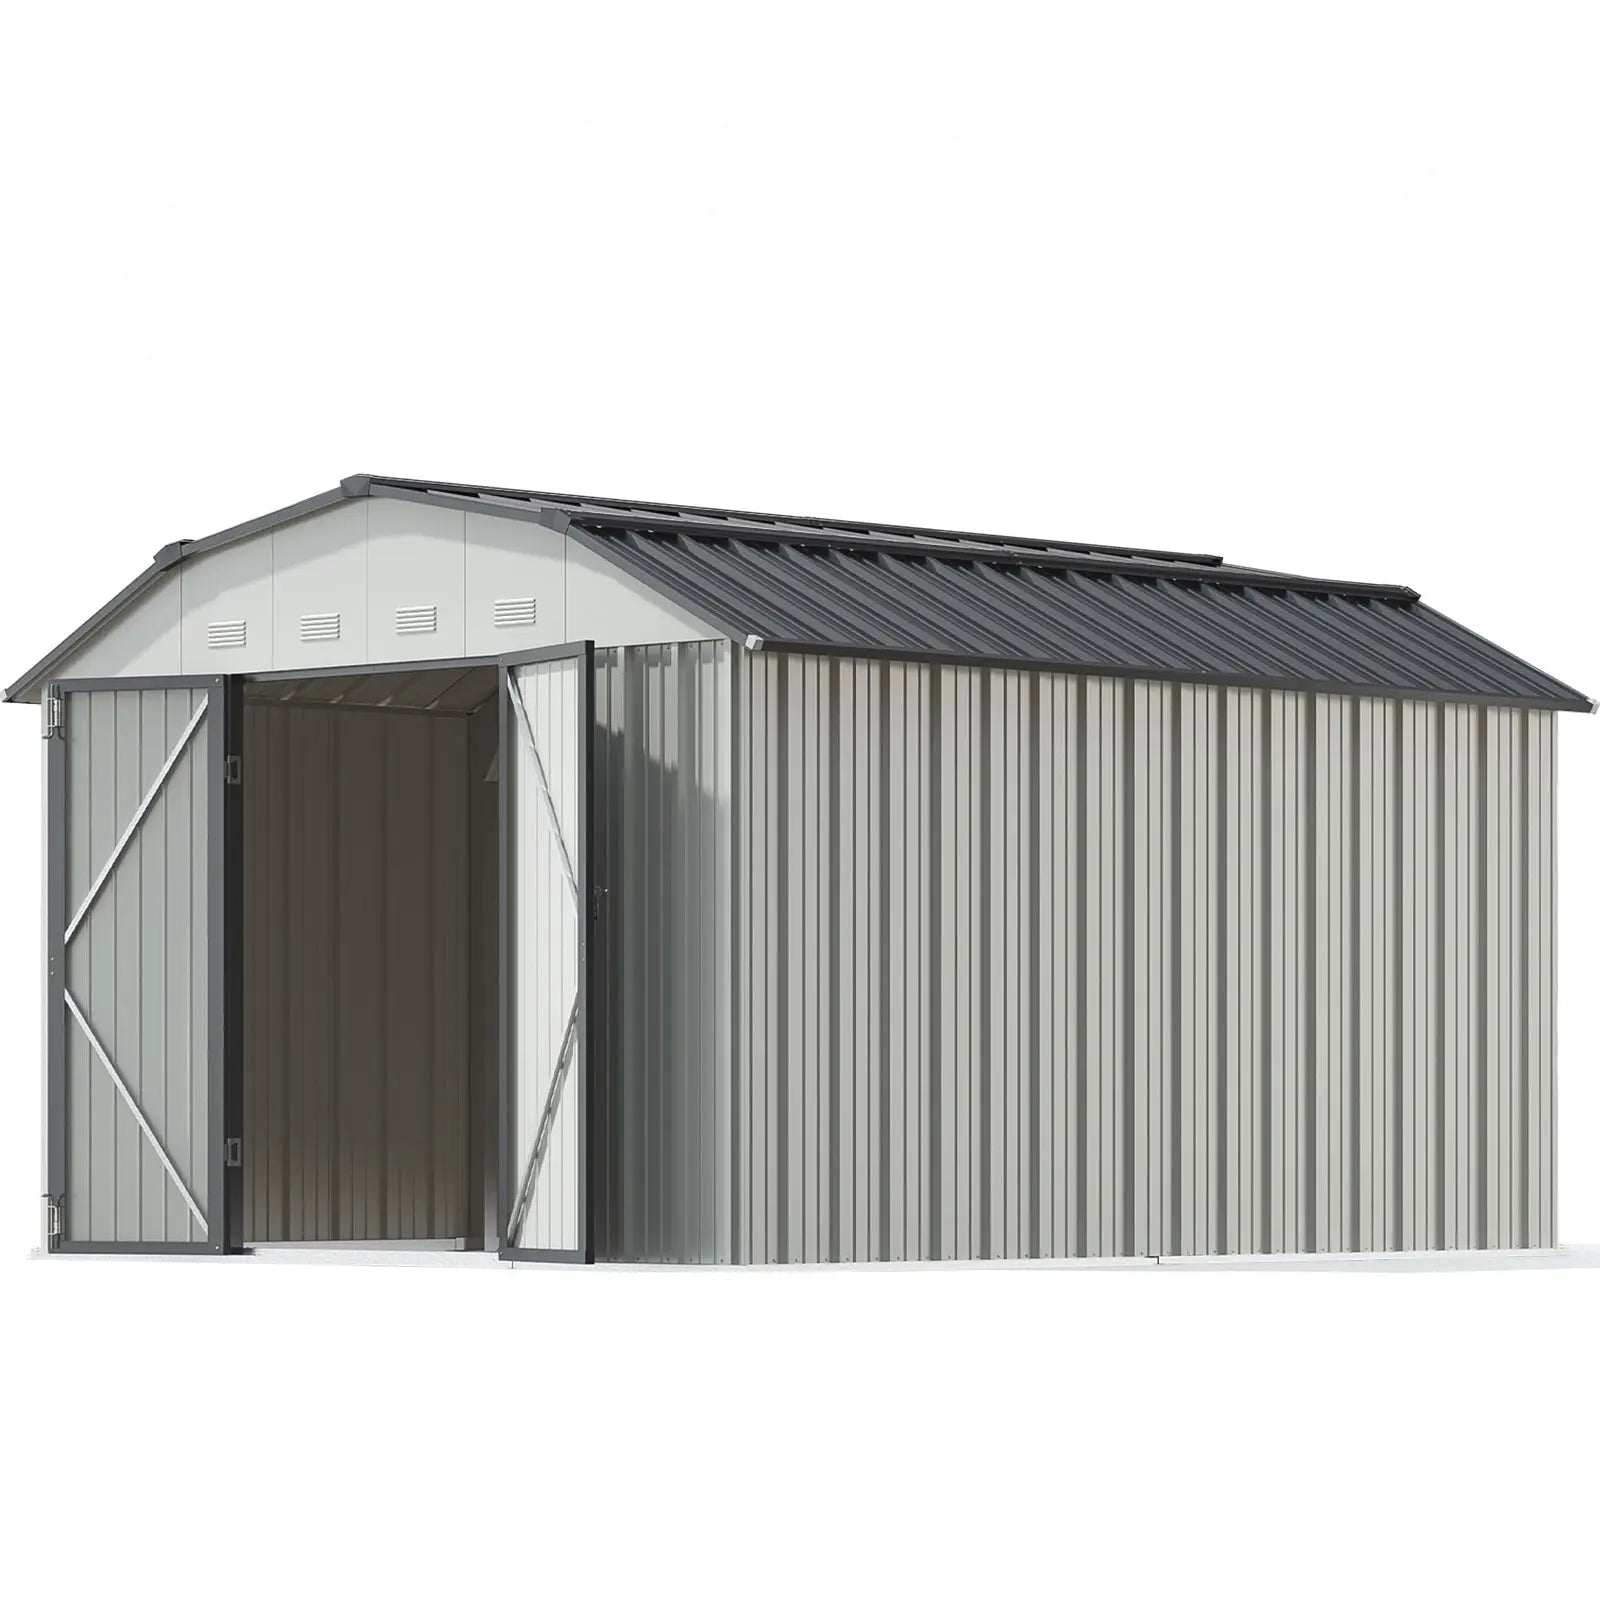 Patiowell 10x12 Metal Shed with Arched Roof-2